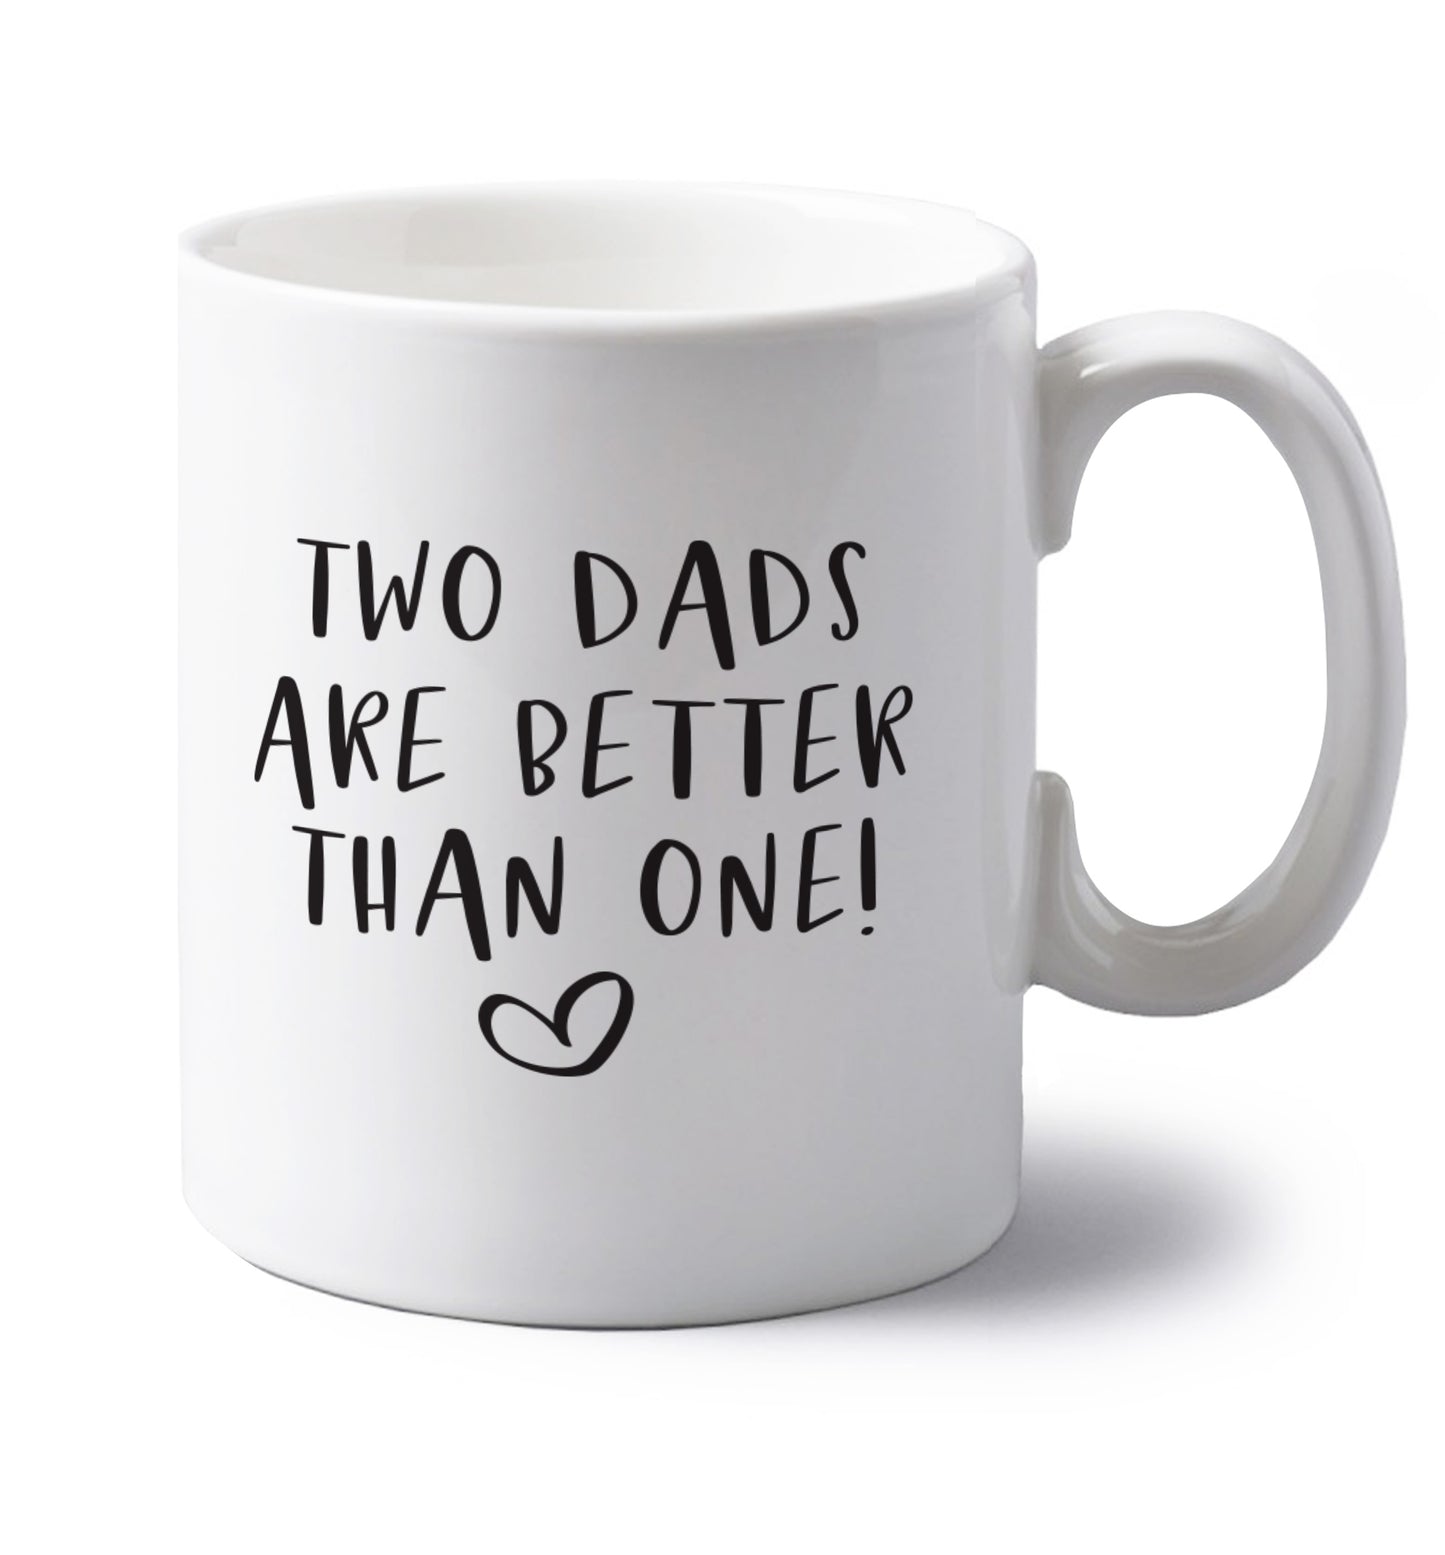 Two dads are better than one left handed white ceramic mug 